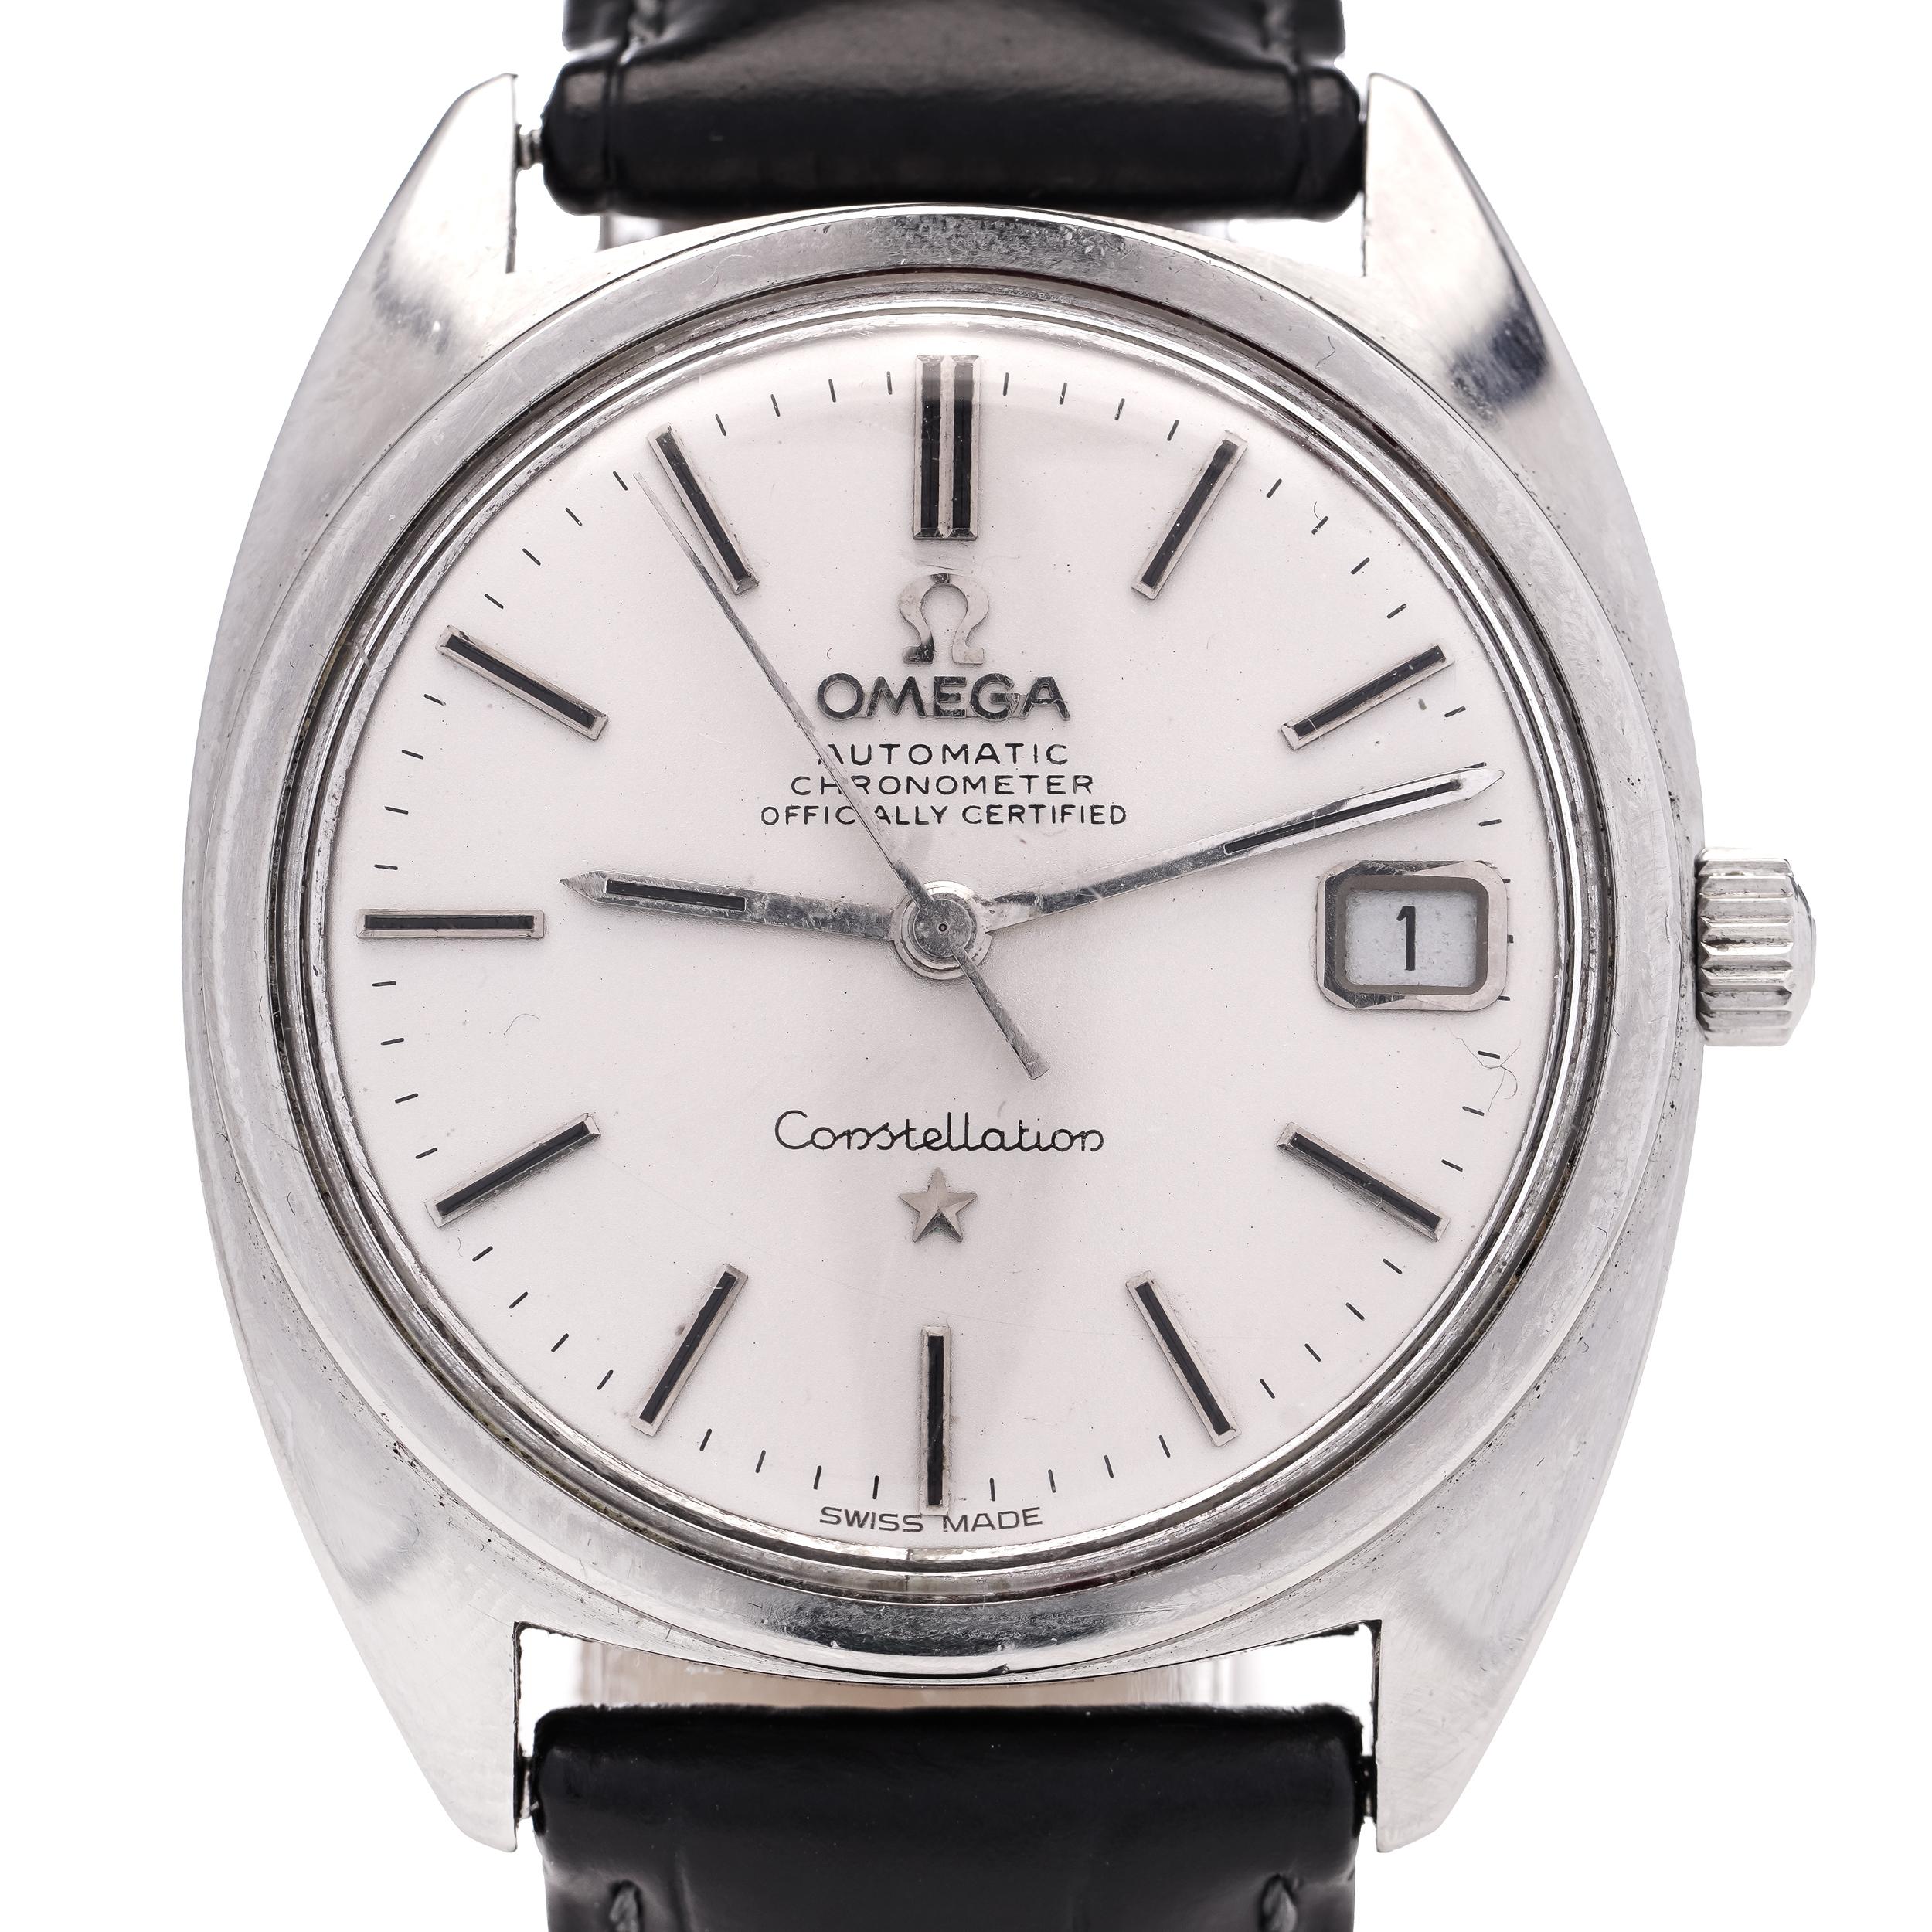 Omega Constellation Chronometer Automatic Vintage Stainless Steel Watch.

Made in Switzerland, Circa 1970's
Case Diameter: 35 mm
Movement: Mechanical Automatic
Case Material: Stainless Steel
Watchband Material: Stainless steel
Dial colour: Silver